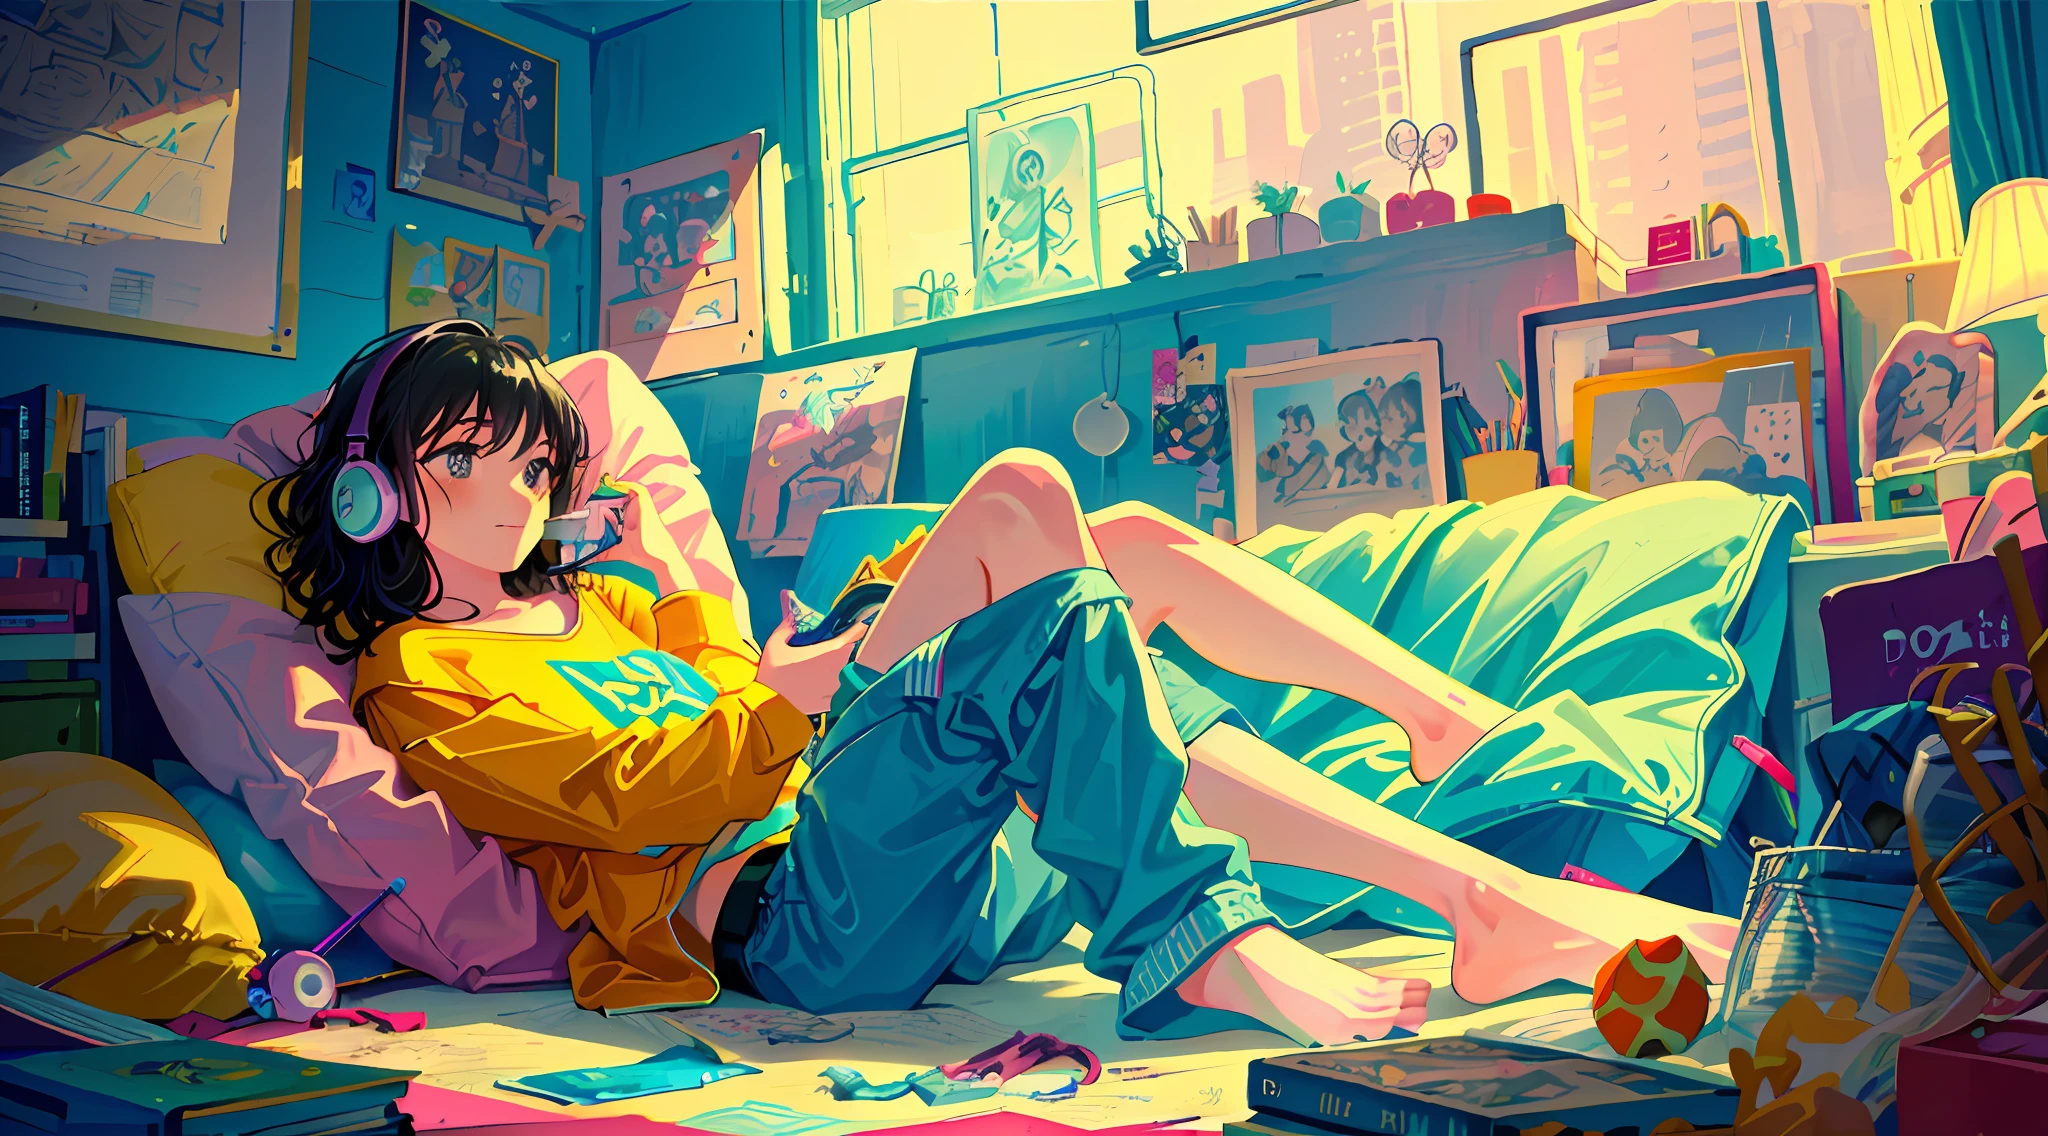 masterpiece, best quality, ultra-detailed, illustration, 2girls, sitting, playful, gaming, messy room, teenage, 15 years old, lighthearted, cozy, relaxed, cheerful, fondness, love, friendship, cute, touching, computer game, controllers, smiles, joy, laughter, comfortable, slippers, pajamas, messy hair, tousled, disarray, cluttered, toys, posters, pillows, blankets, lamp, desk, chair, cozy atmosphere, night lighting, bright colors, soft pastels, flowers, plants, books, headphones, snacks, soda, energy drinks, manga, novels, plushies, figurines, posters, pictures, posters, wall scrolls, stickers, decorations, bed, blankets, pillows, stuffed animals, cozy blankets, warm blankets, comfortable clothes, casual attire, leisure wear, sweatshirt, sweatpants, shorts, t-shirt, tank top, socks,